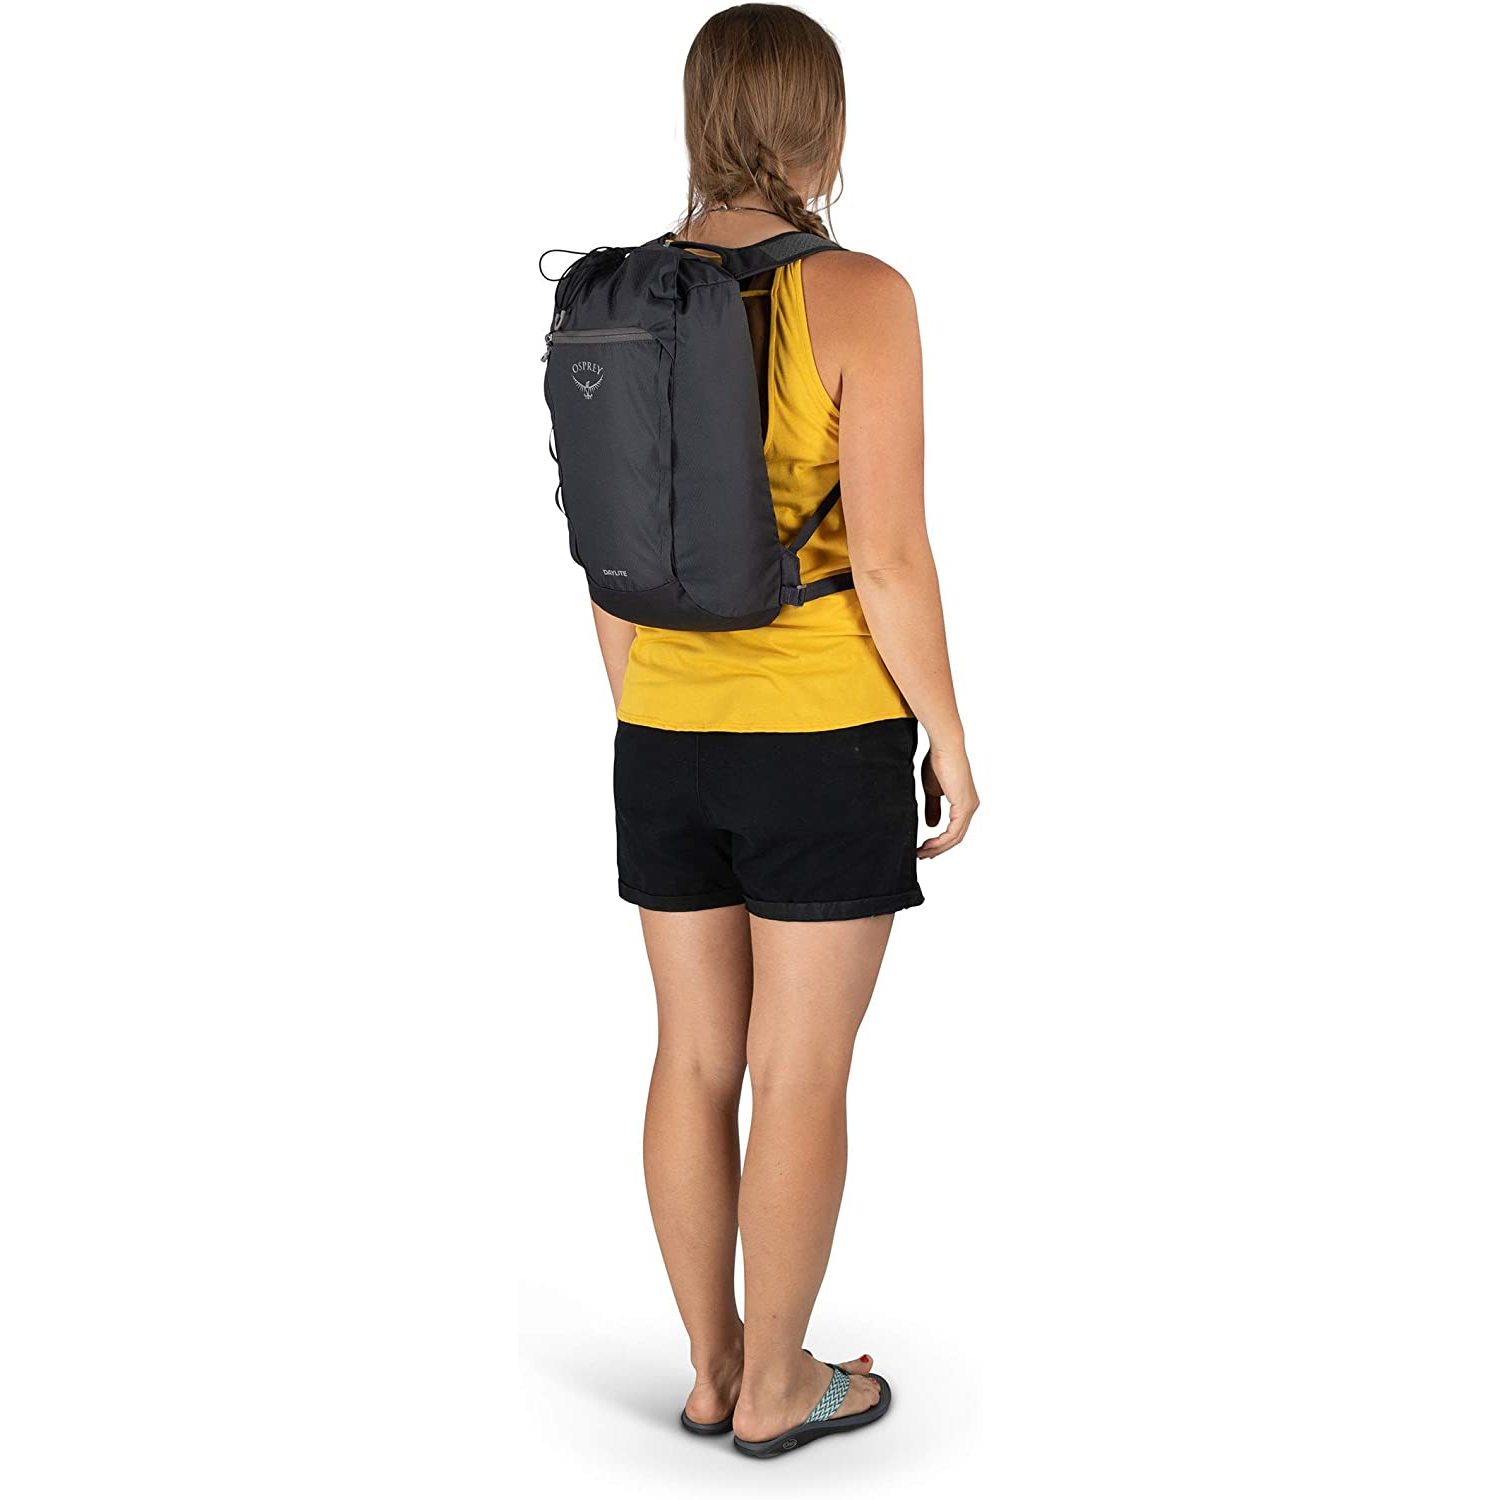 Daylite Cinch Backpack , Black, Top-loading access with cinch closing system - image 5 of 7